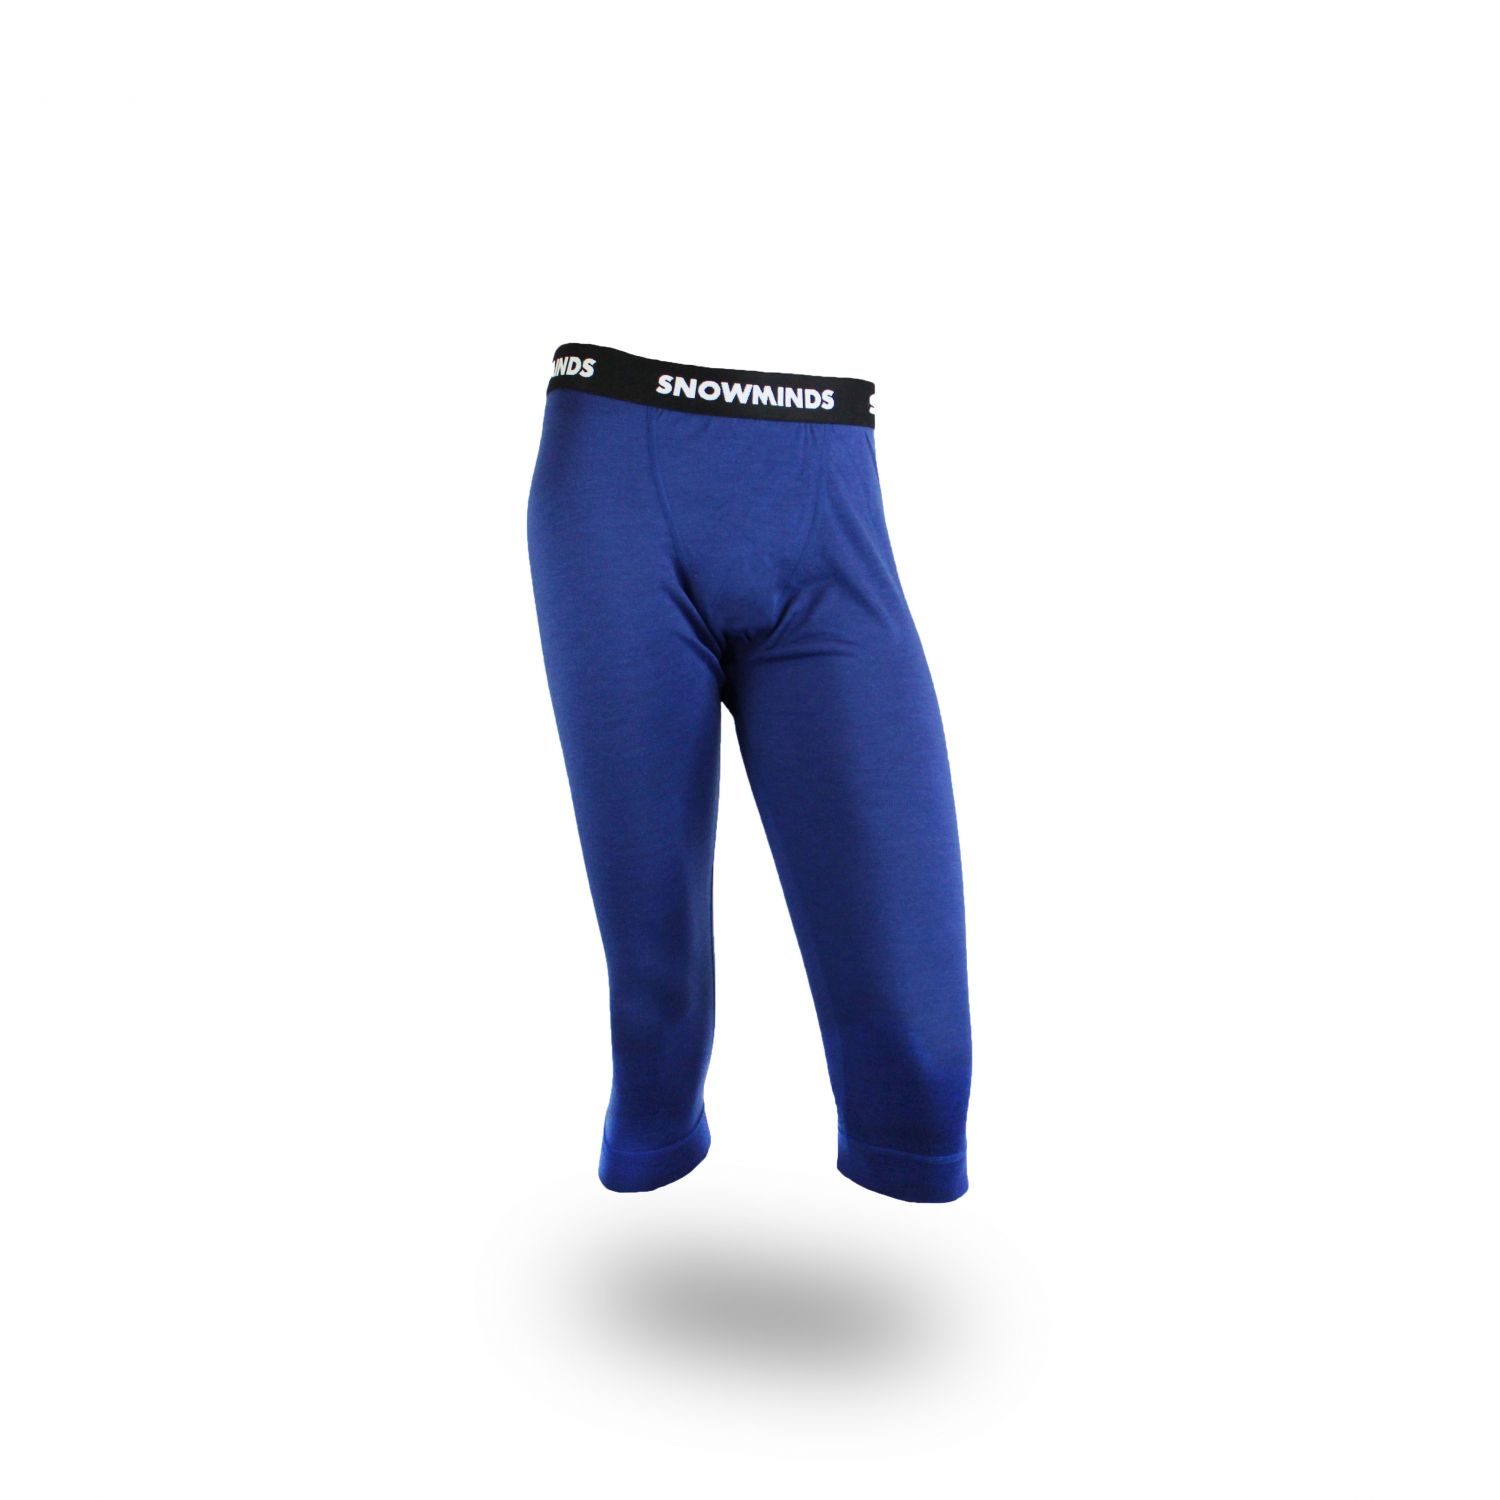 The Marvellous Merino Wool Pants, Snowminds, herre, Blue Bell Weather